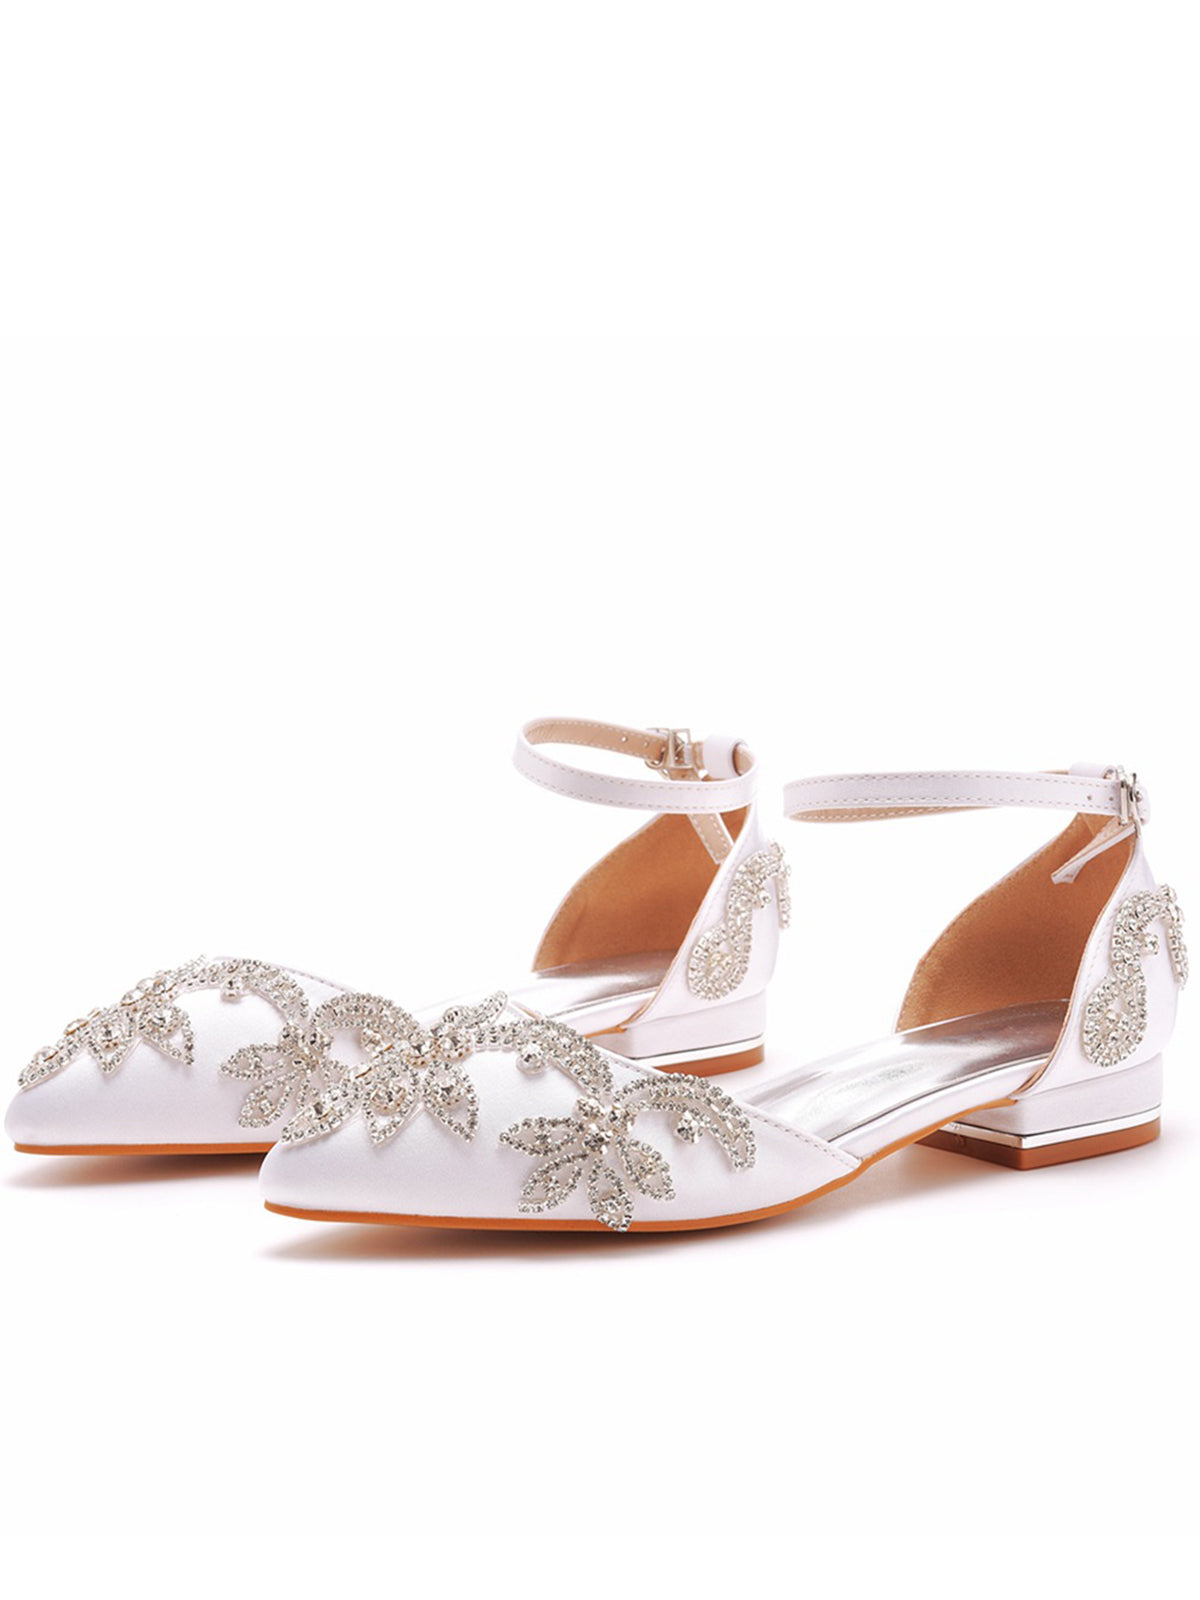 White Satin Rhinestone Flowers Pointed Toe Ankle Strap Chunky Heels